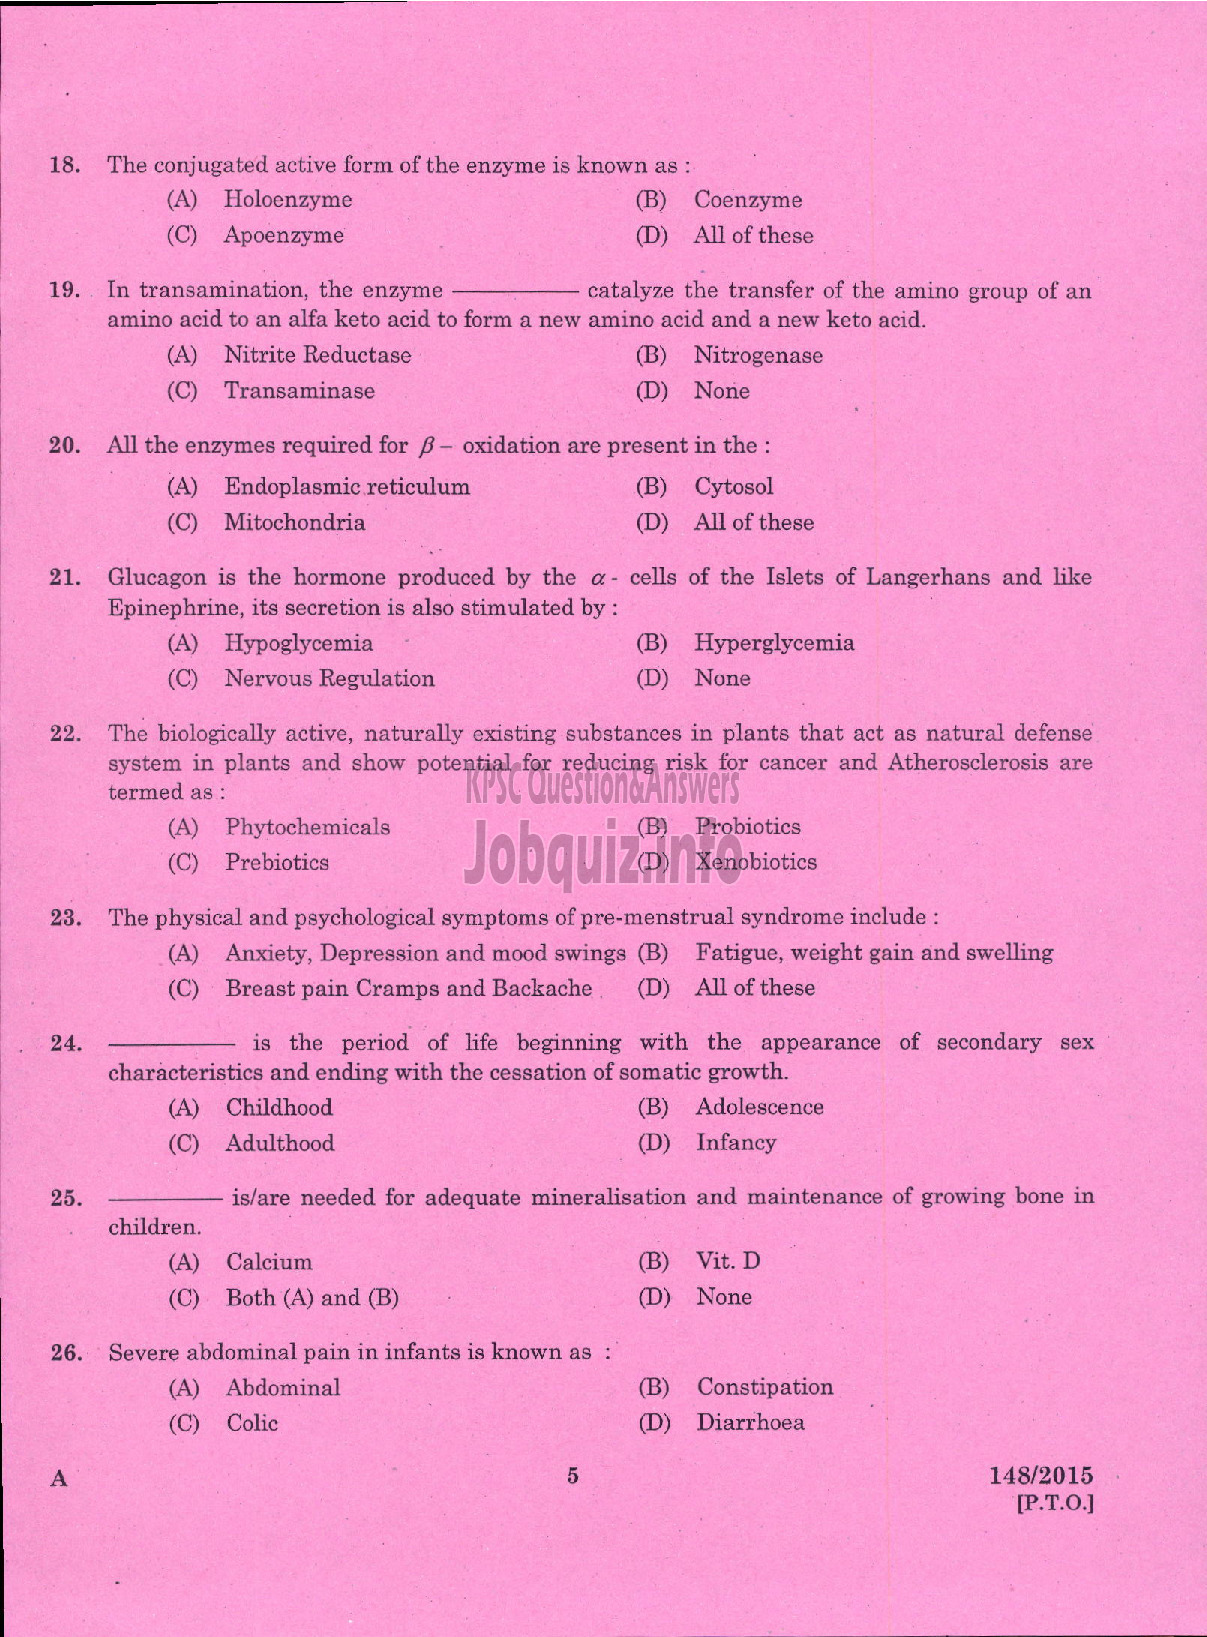 Kerala PSC Question Paper - LECTURER IN HOMESCIENCE FOOD AND NUTRITION COLLEGIATE EDUCATION-3